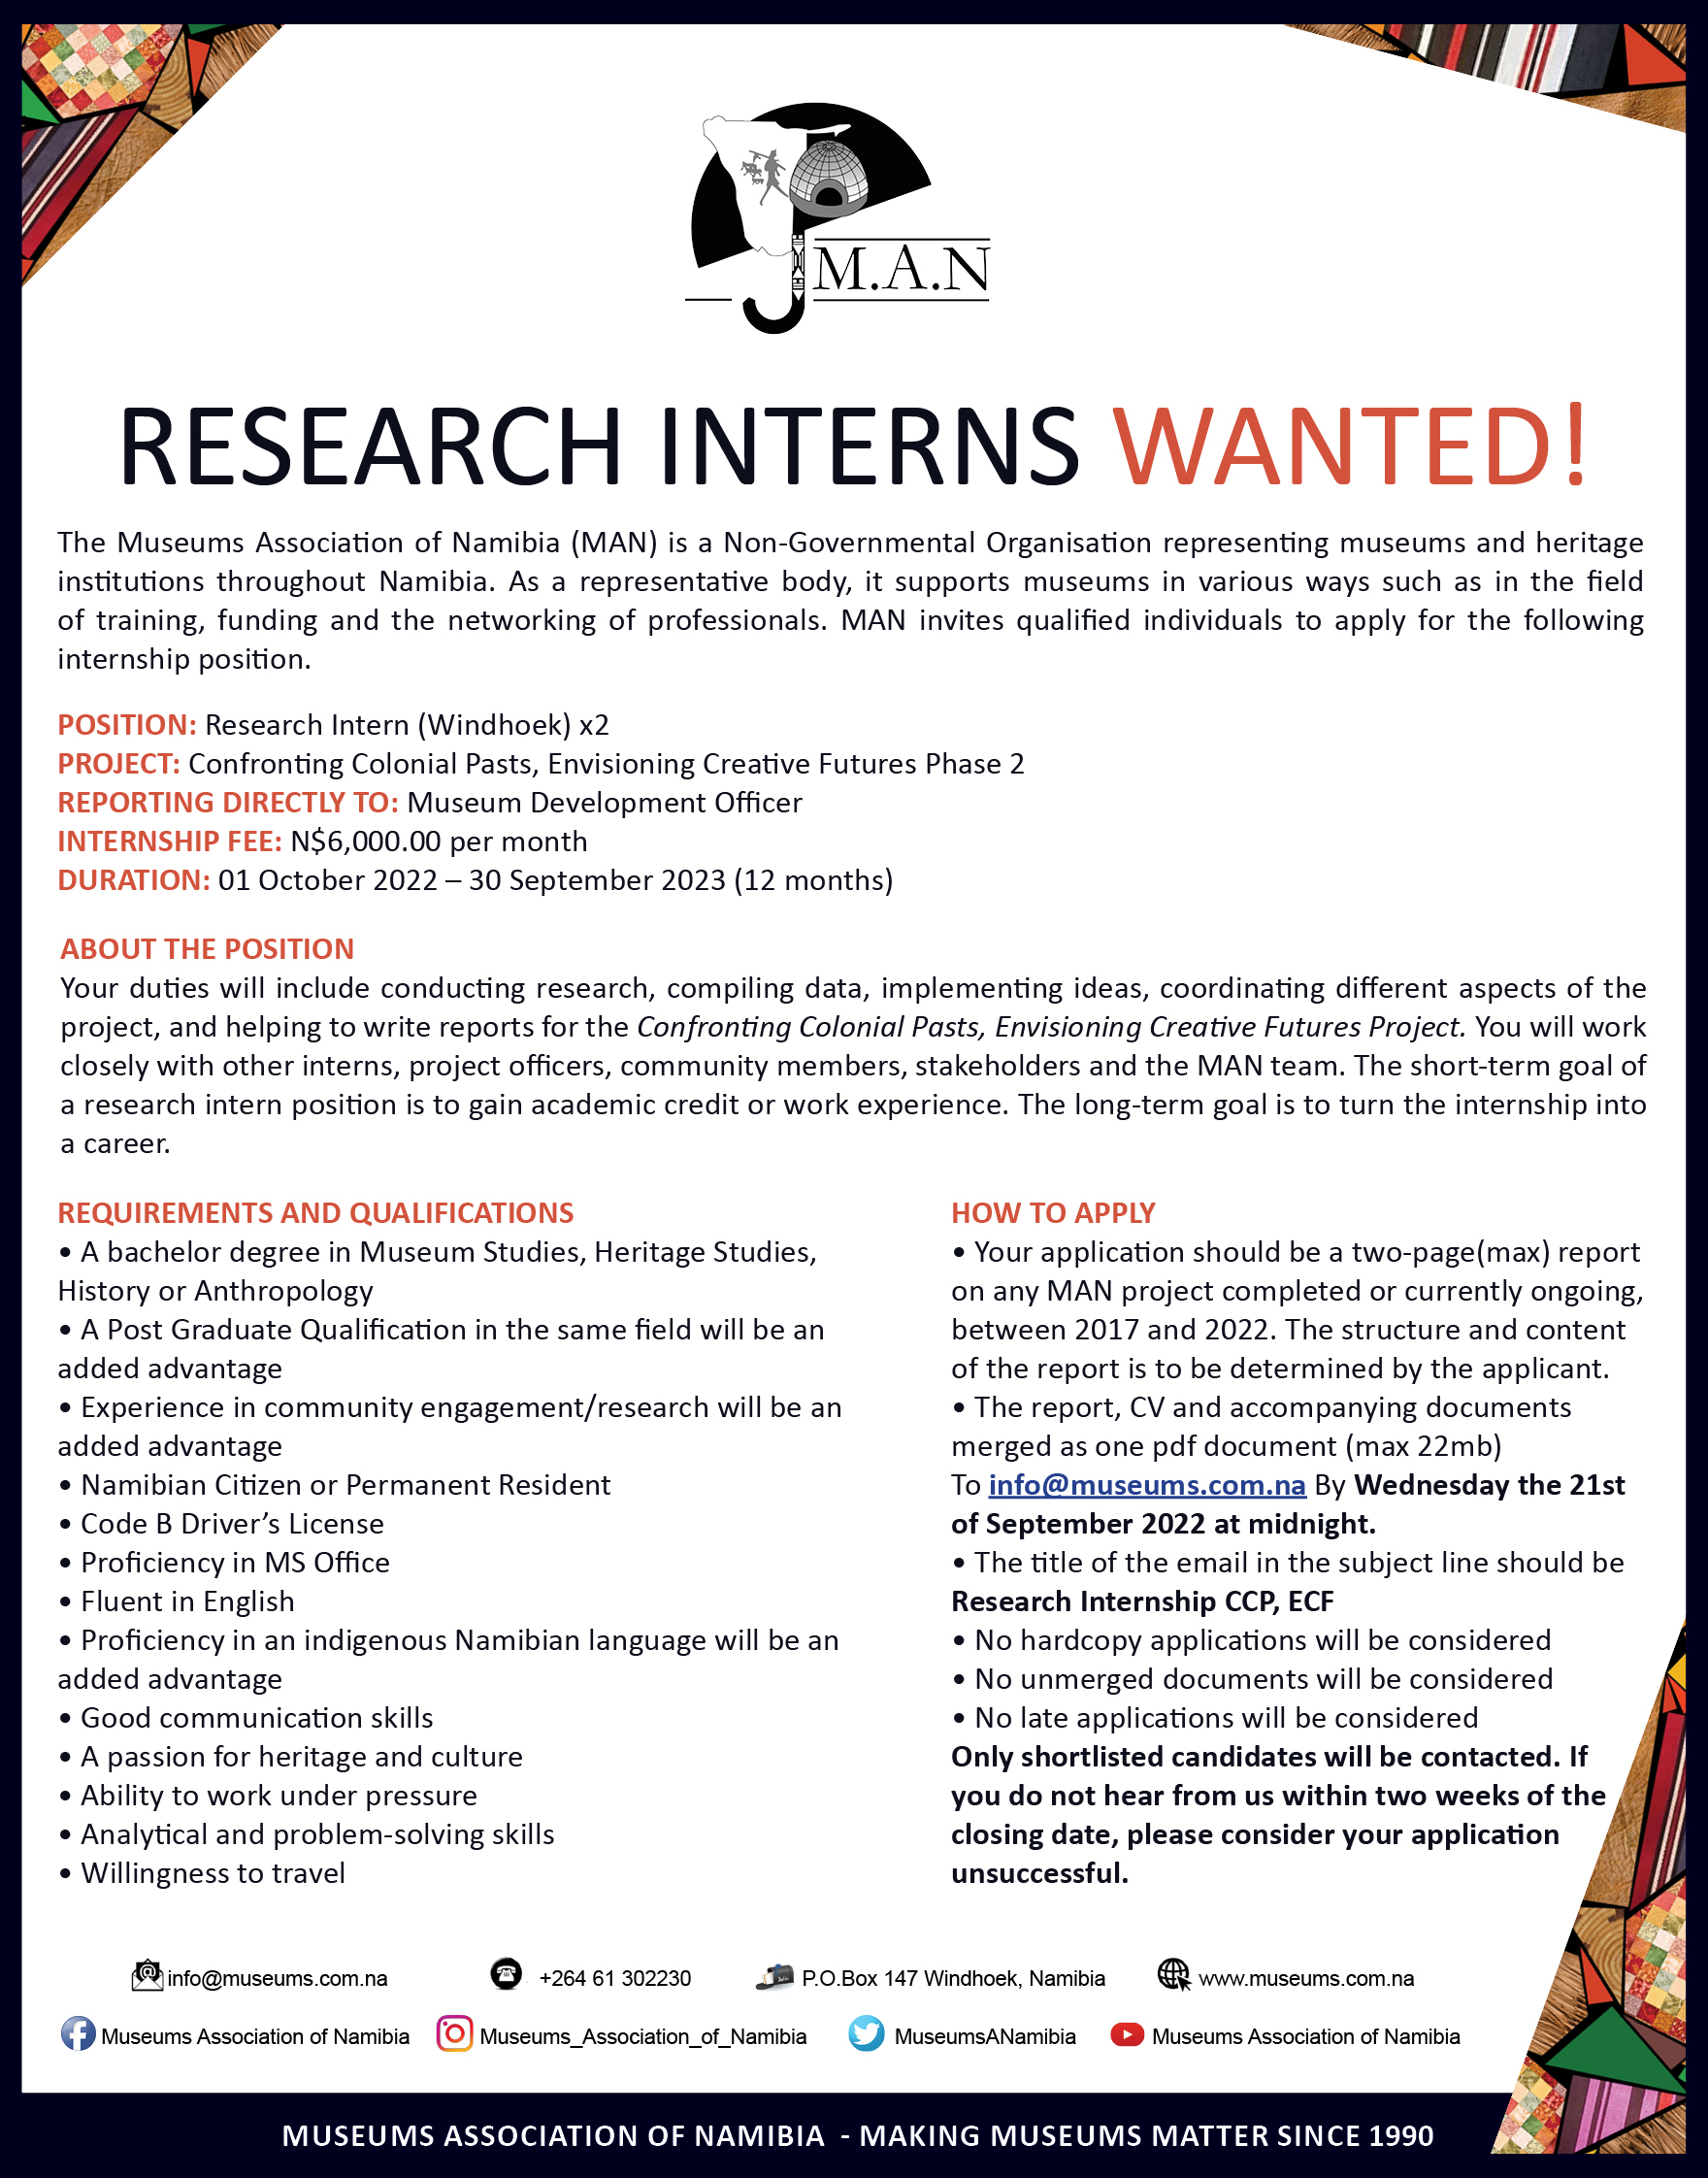 Research Interns Wanted 2022